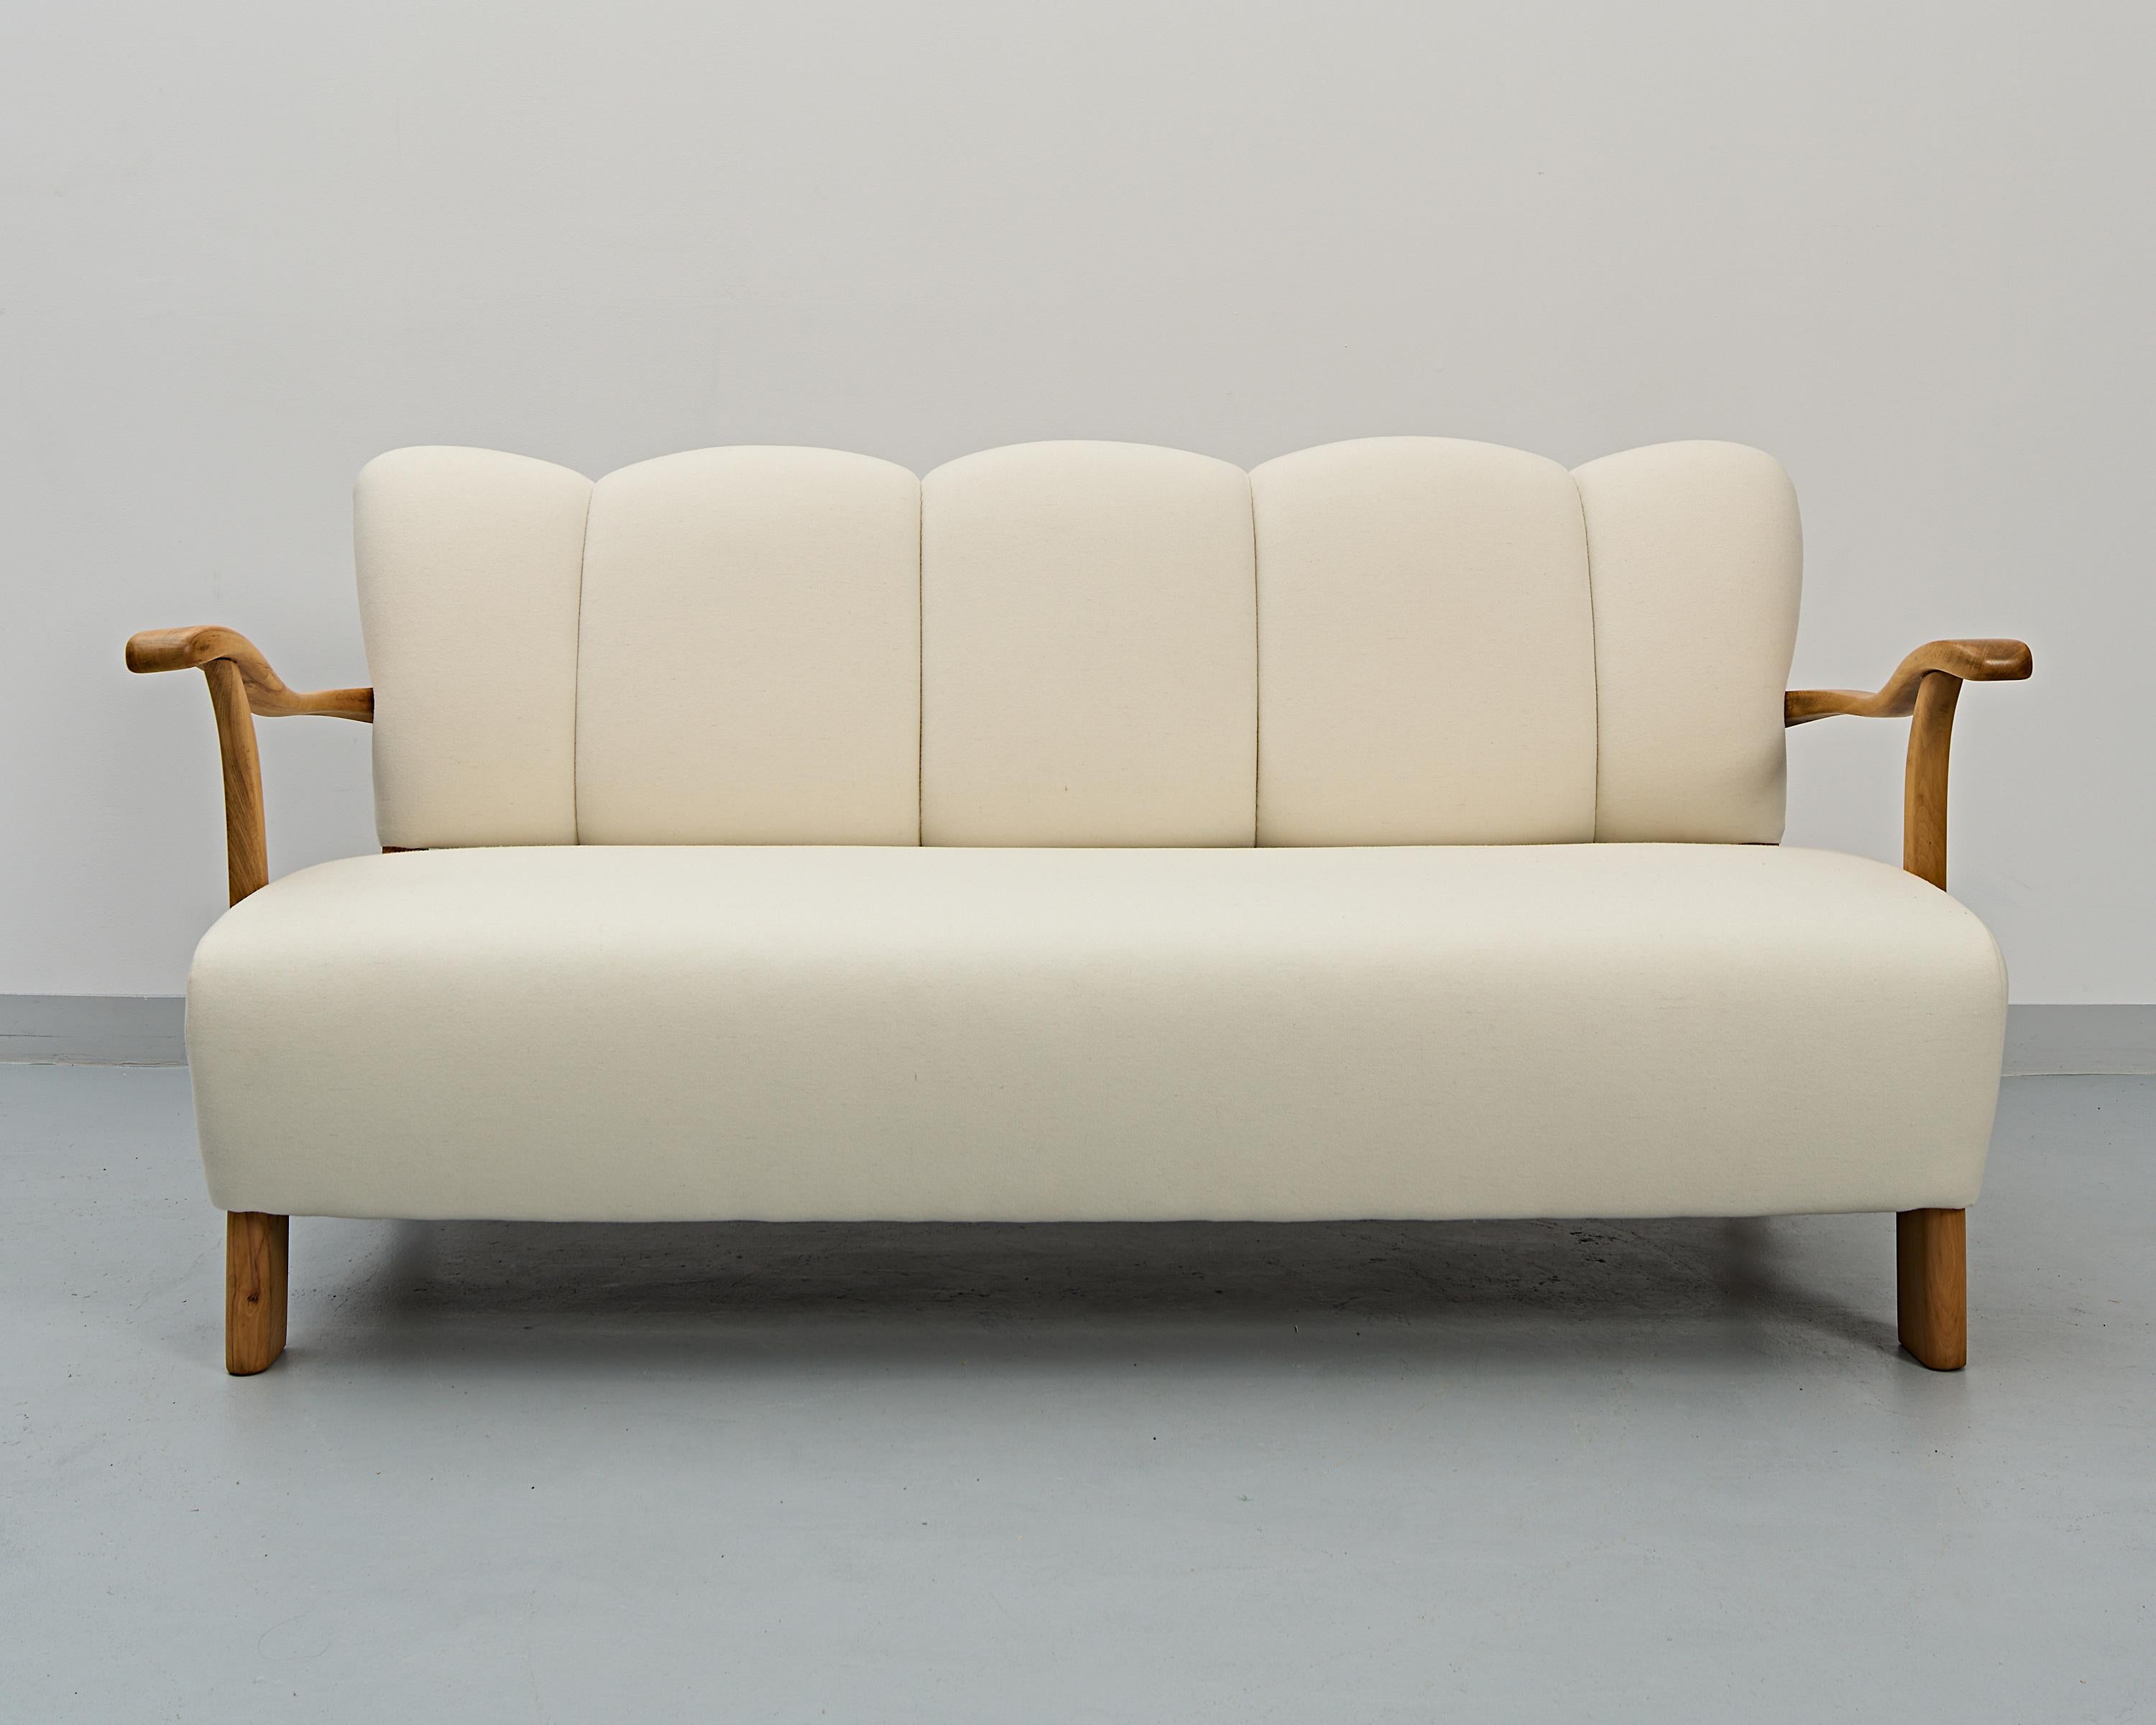 An art deco set of a sofa with two armchairs by the world renowned former Czechoslovakian designer - Jindrich Halabala. 
Incredible restoration work. 
A strikingly beautiful set of vintage furniture and an impressive investment.